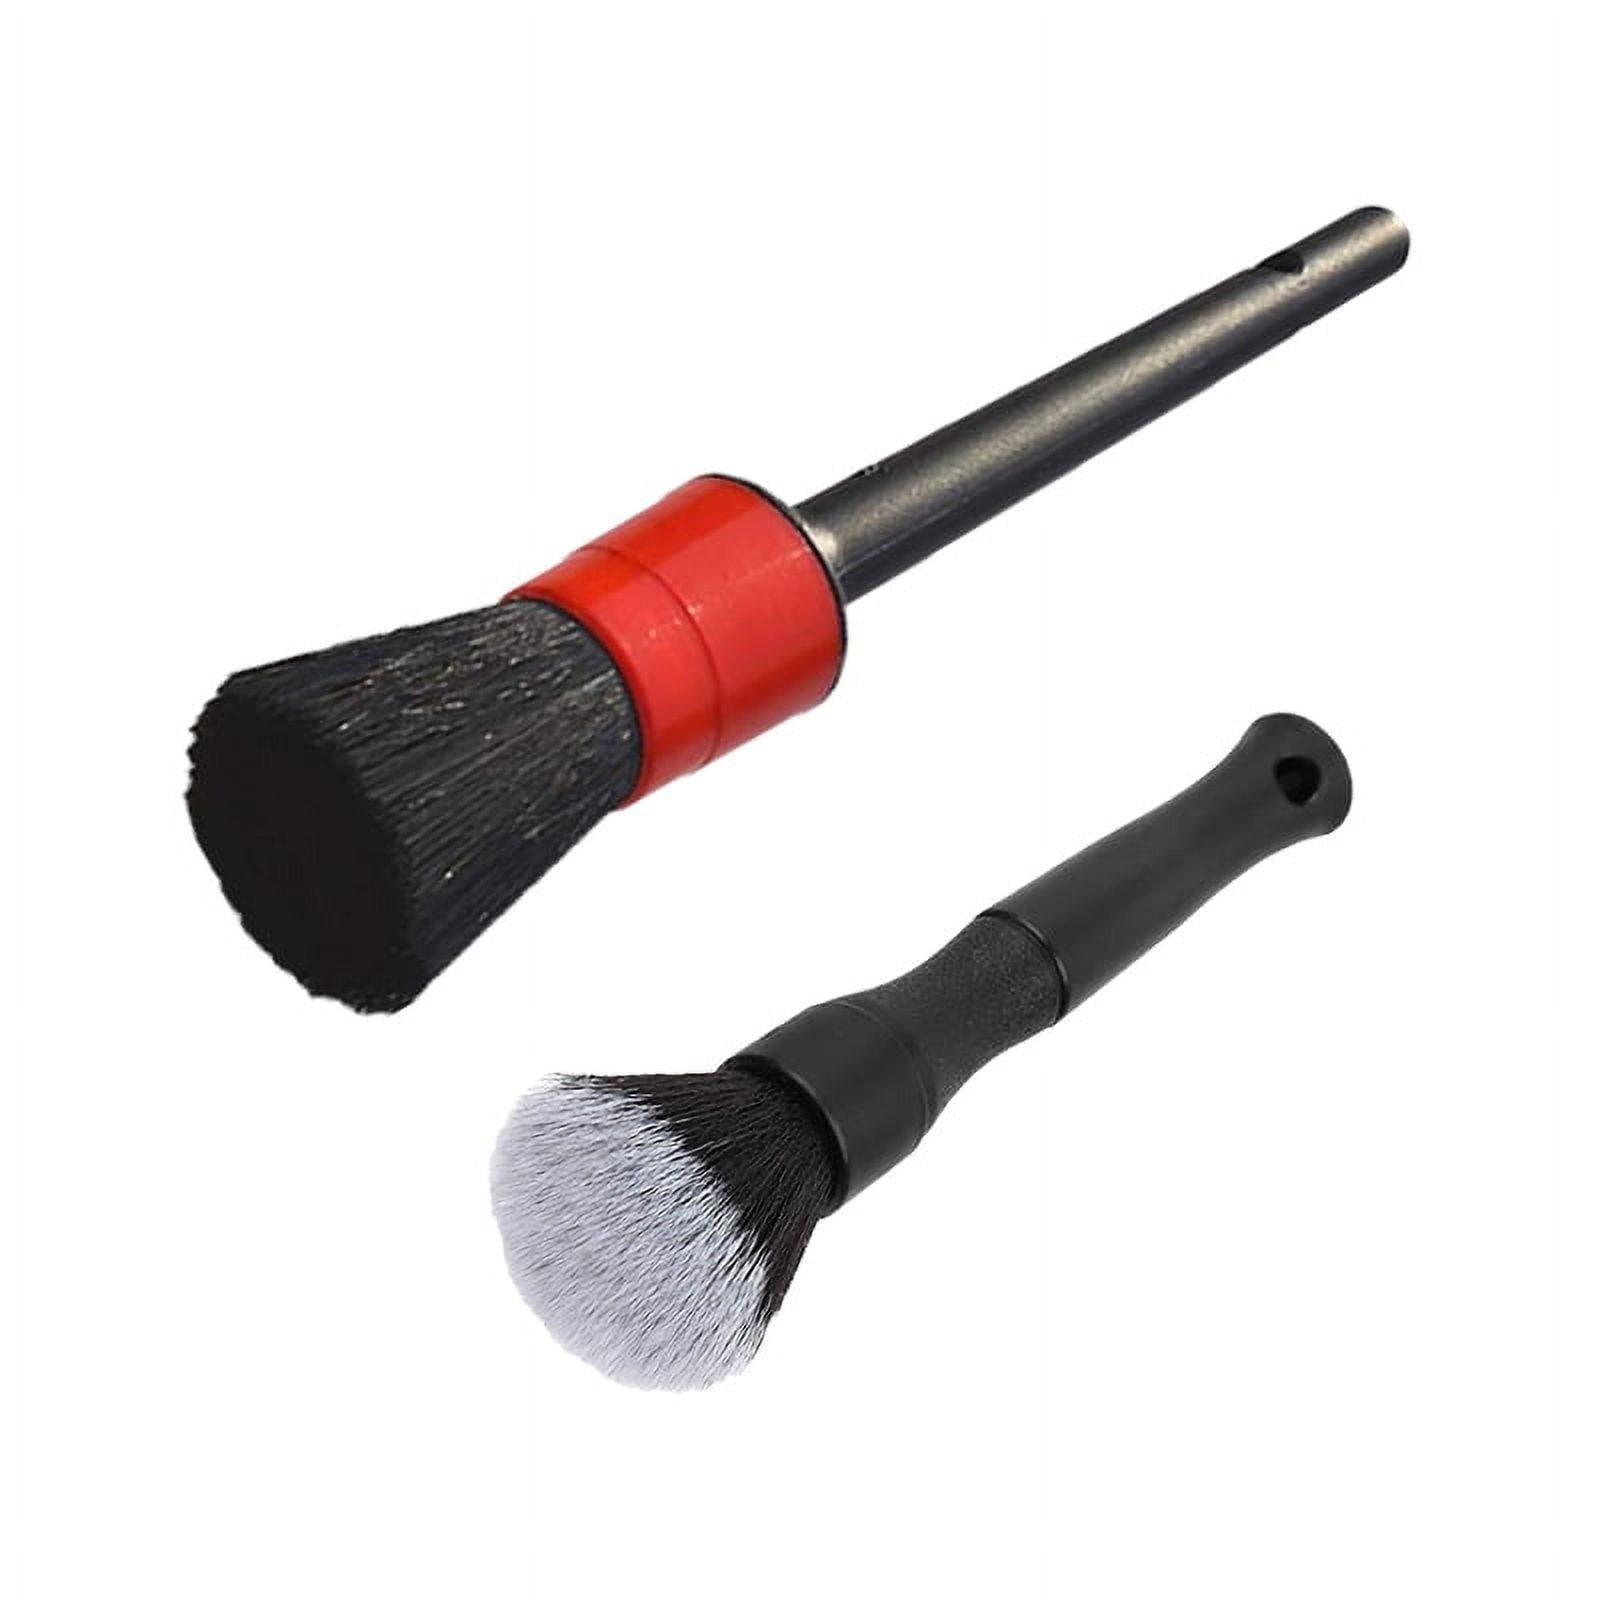 Parts Brush Division Atlasta (AT101) Parts Cleaning Brush (9.75 Inches, 4.3  Ounces) for Cleaning Auto Engine Parts, Small Motors, Car Detailing, Boa